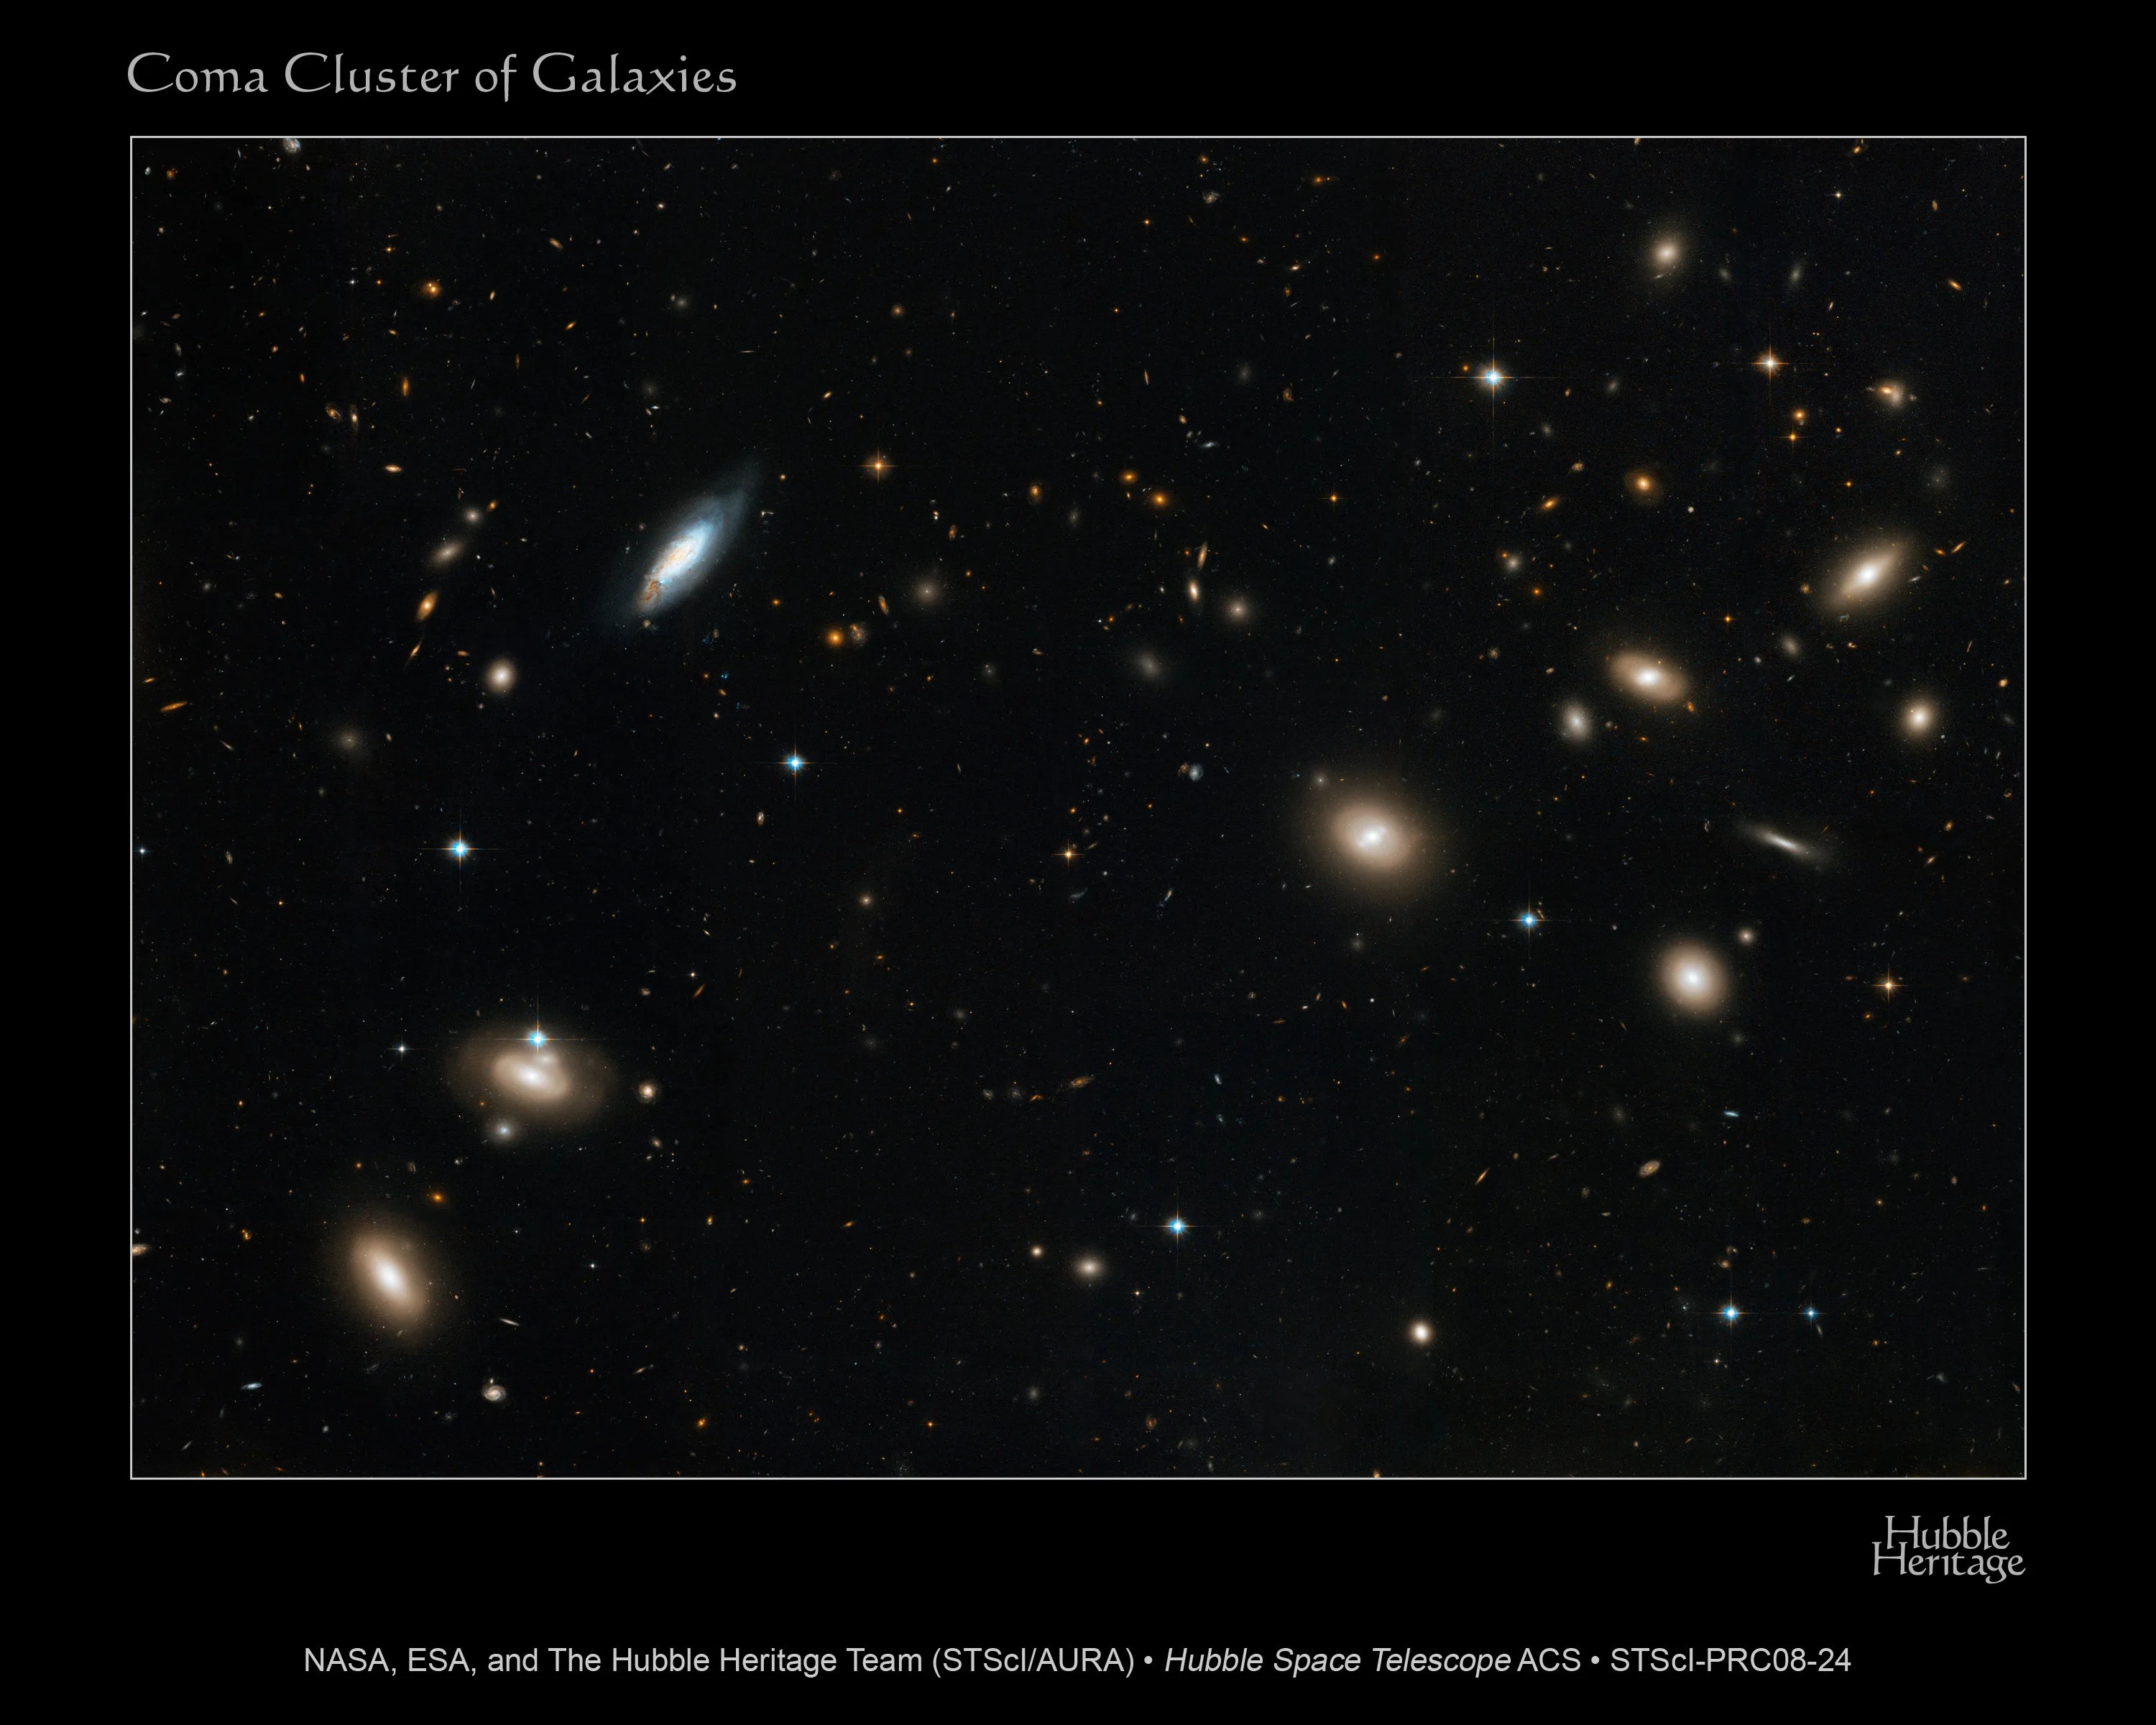 Hubble image of a galaxy cluster